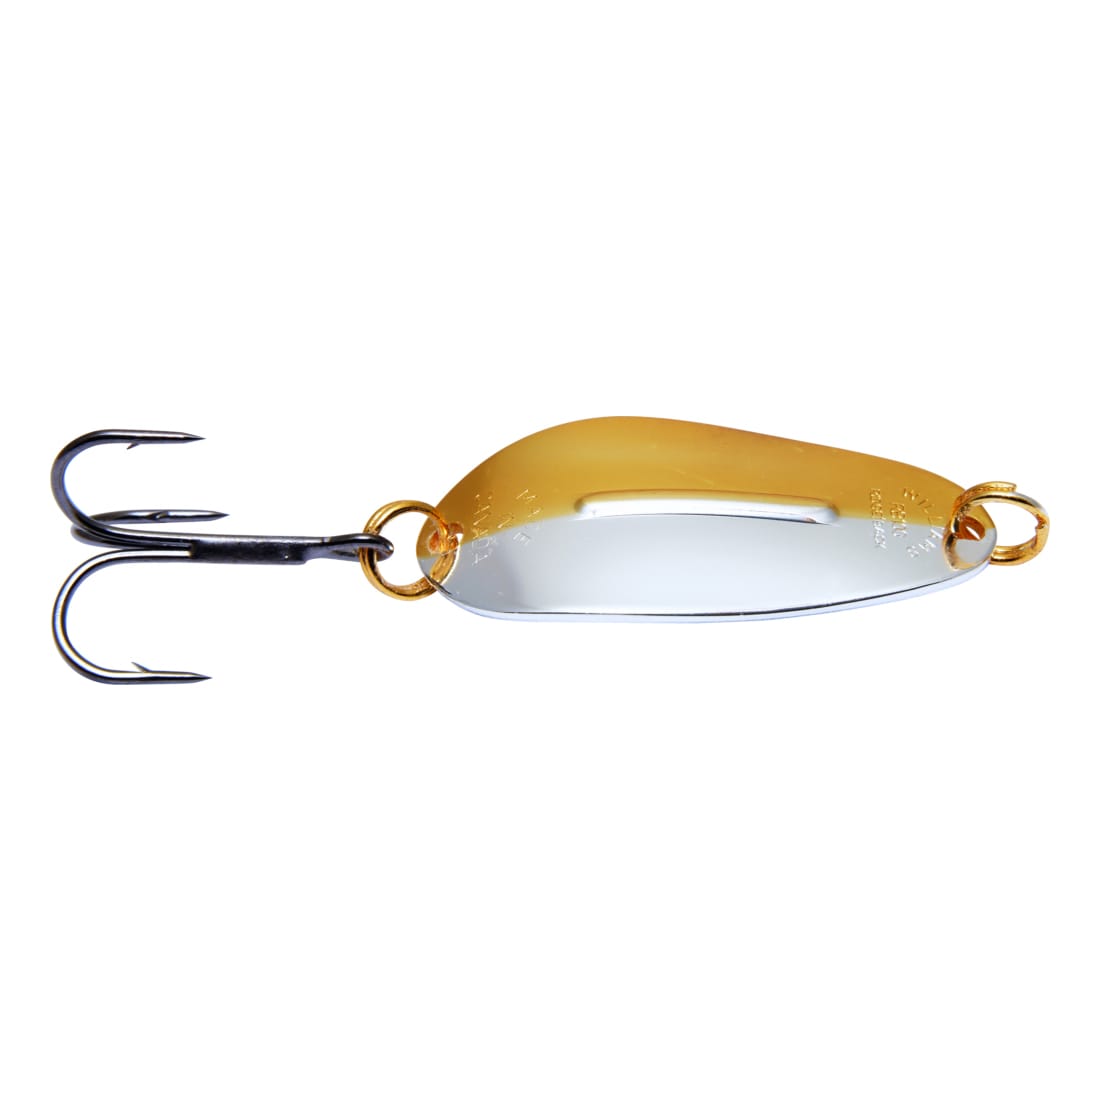 Thomas Spinning Lures Buoyant 1/4 0Z Copper Fishing Equipment